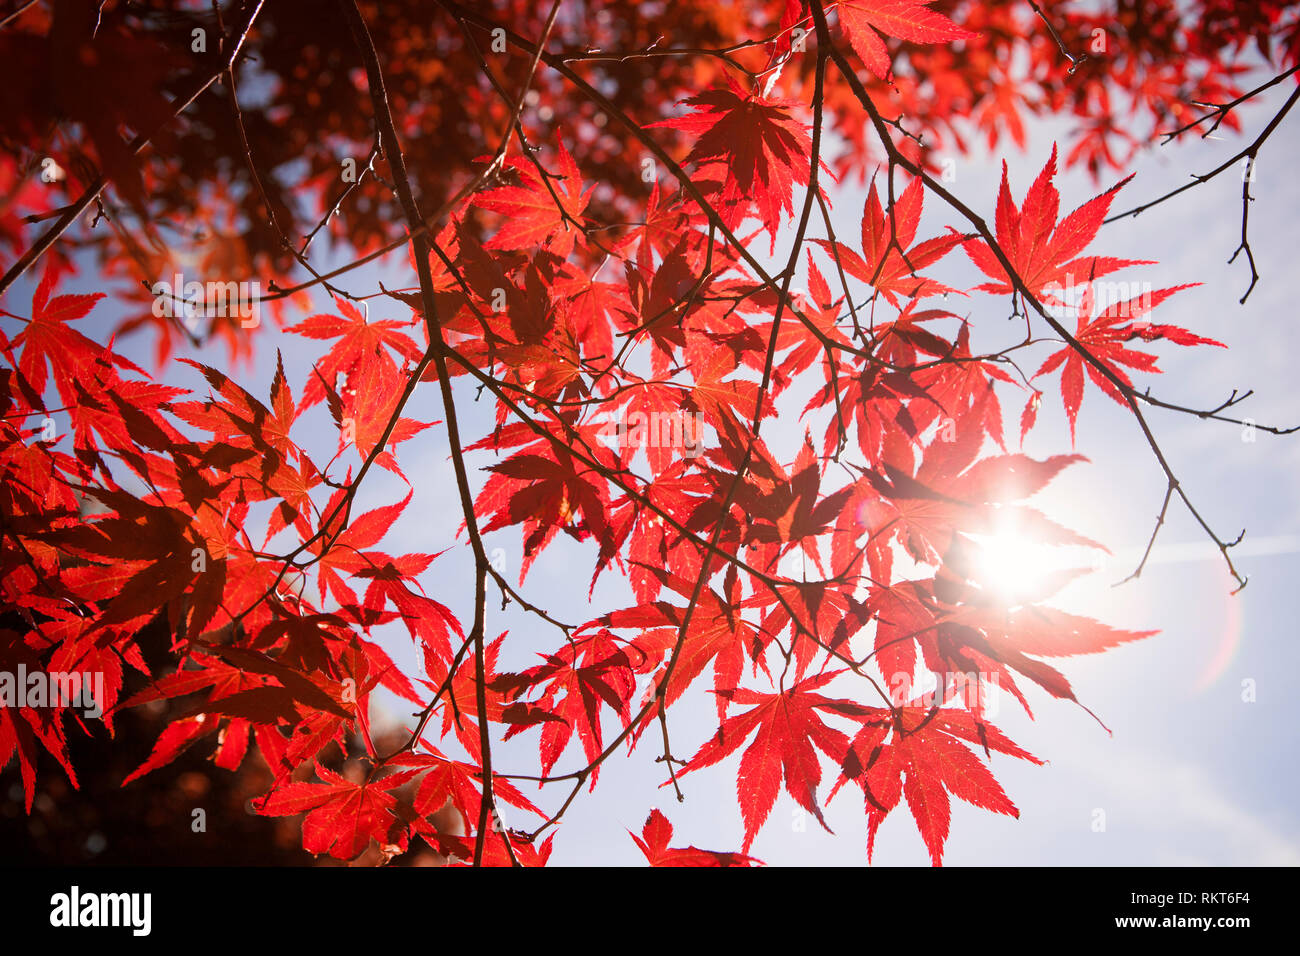 Red leaves on a Japanese Maple tree from directly below against a clear blue summer sky Stock Photo